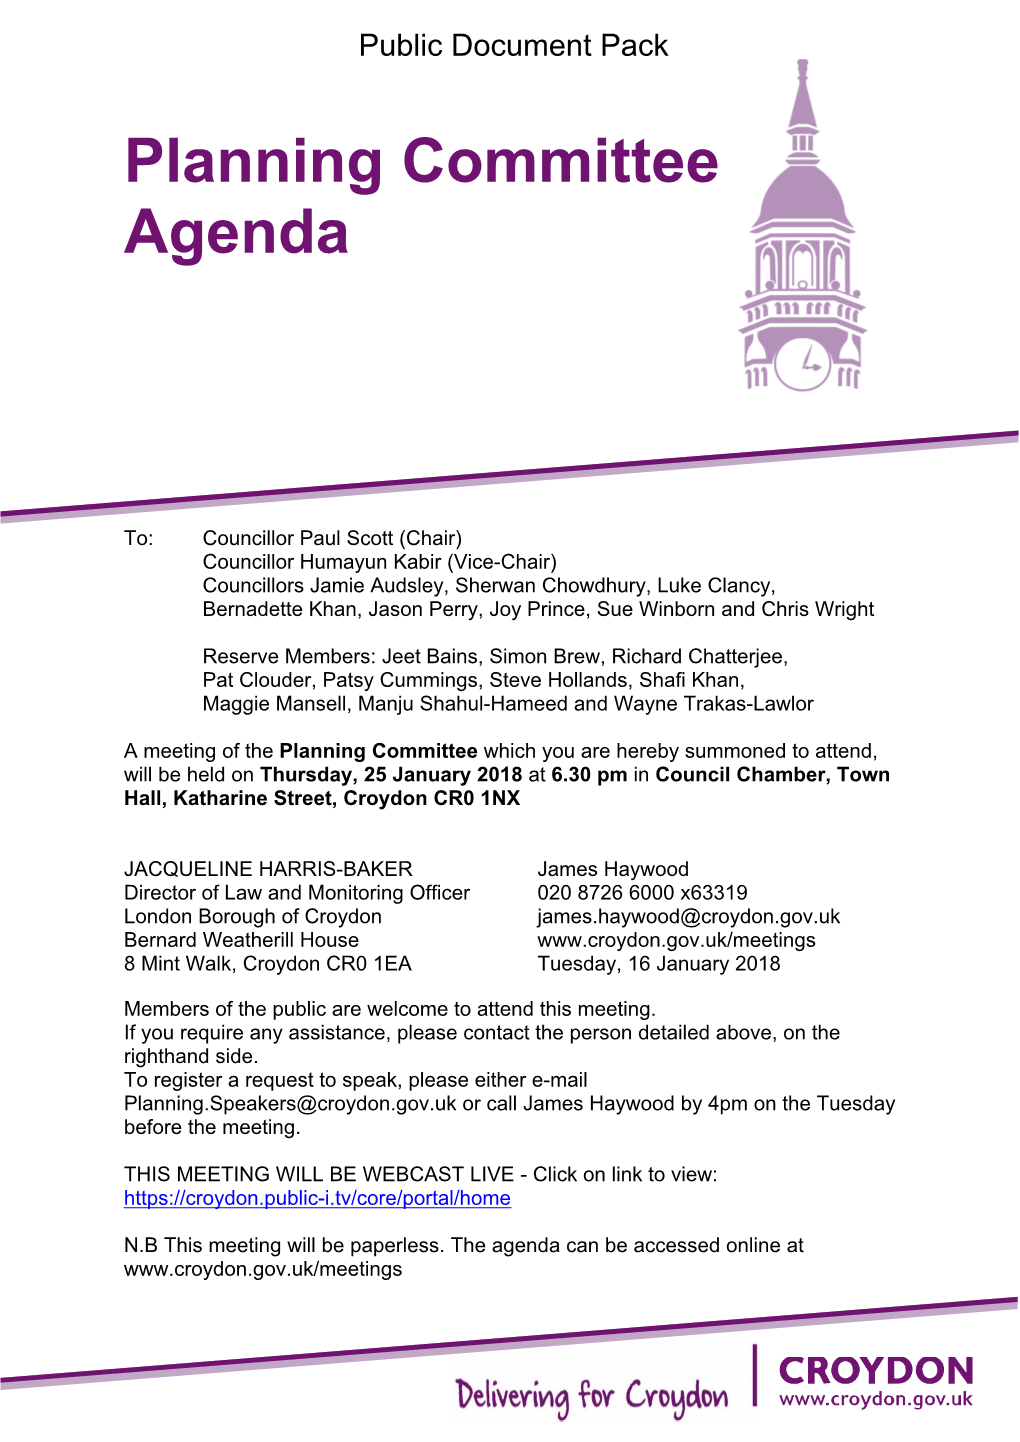 (Public Pack)Agenda Document for Planning Committee, 25/01/2018